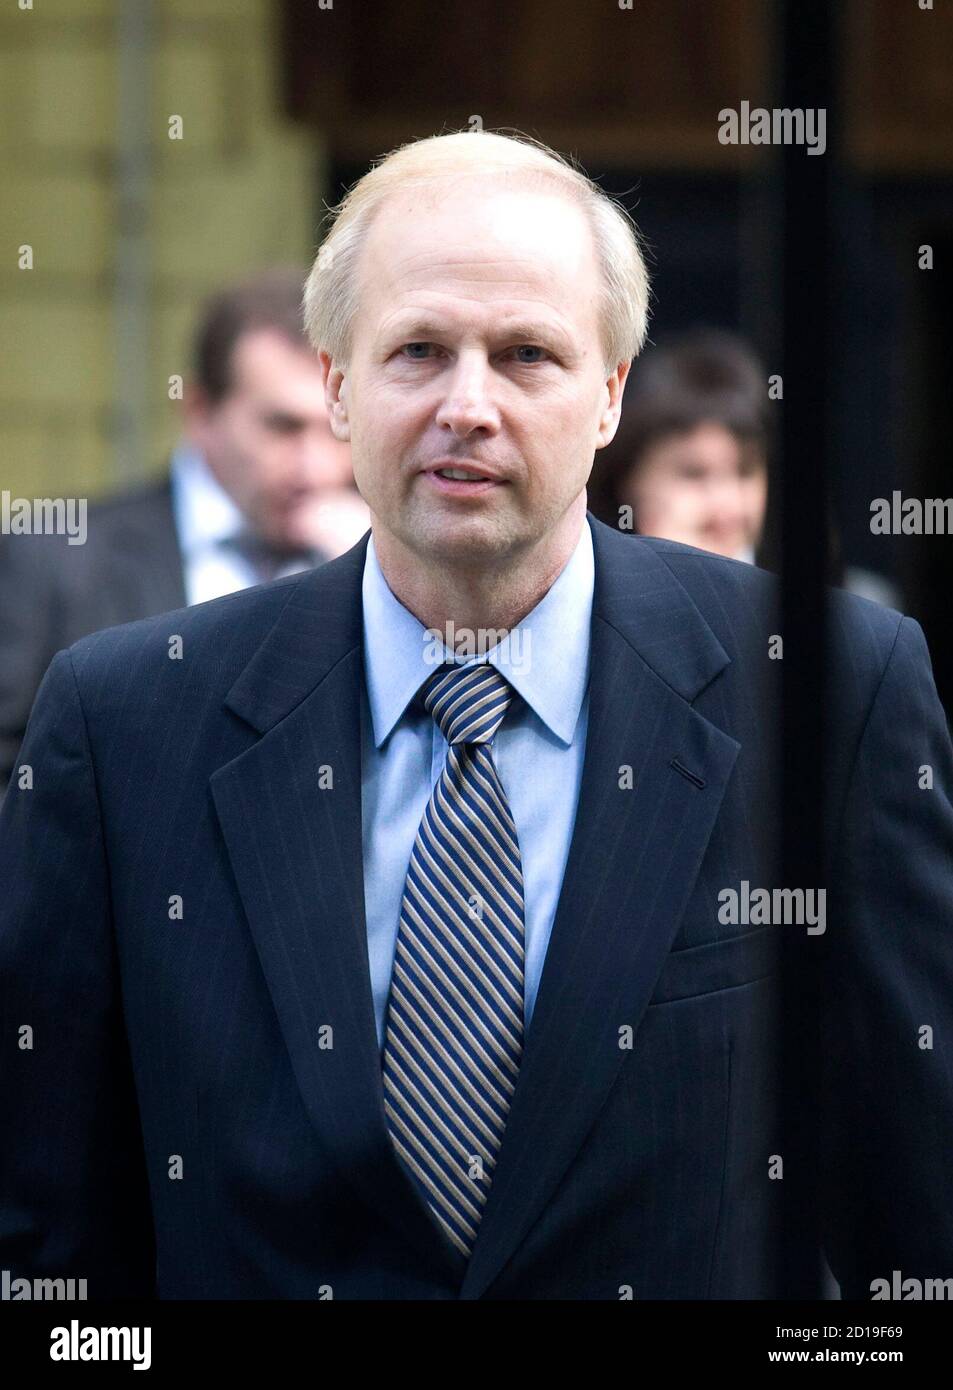 TNK-BP Chief Executive Robert Dudley leaves a local interior ministry office in Moscow June 10, 2008. The chief executive of oil major BP's Russian joint venture said on Tuesday his questioning by the authorities as part of a tax probe was a routine matter. REUTERS/Alexander Natruskin  (RUSSIA) Stock Photo